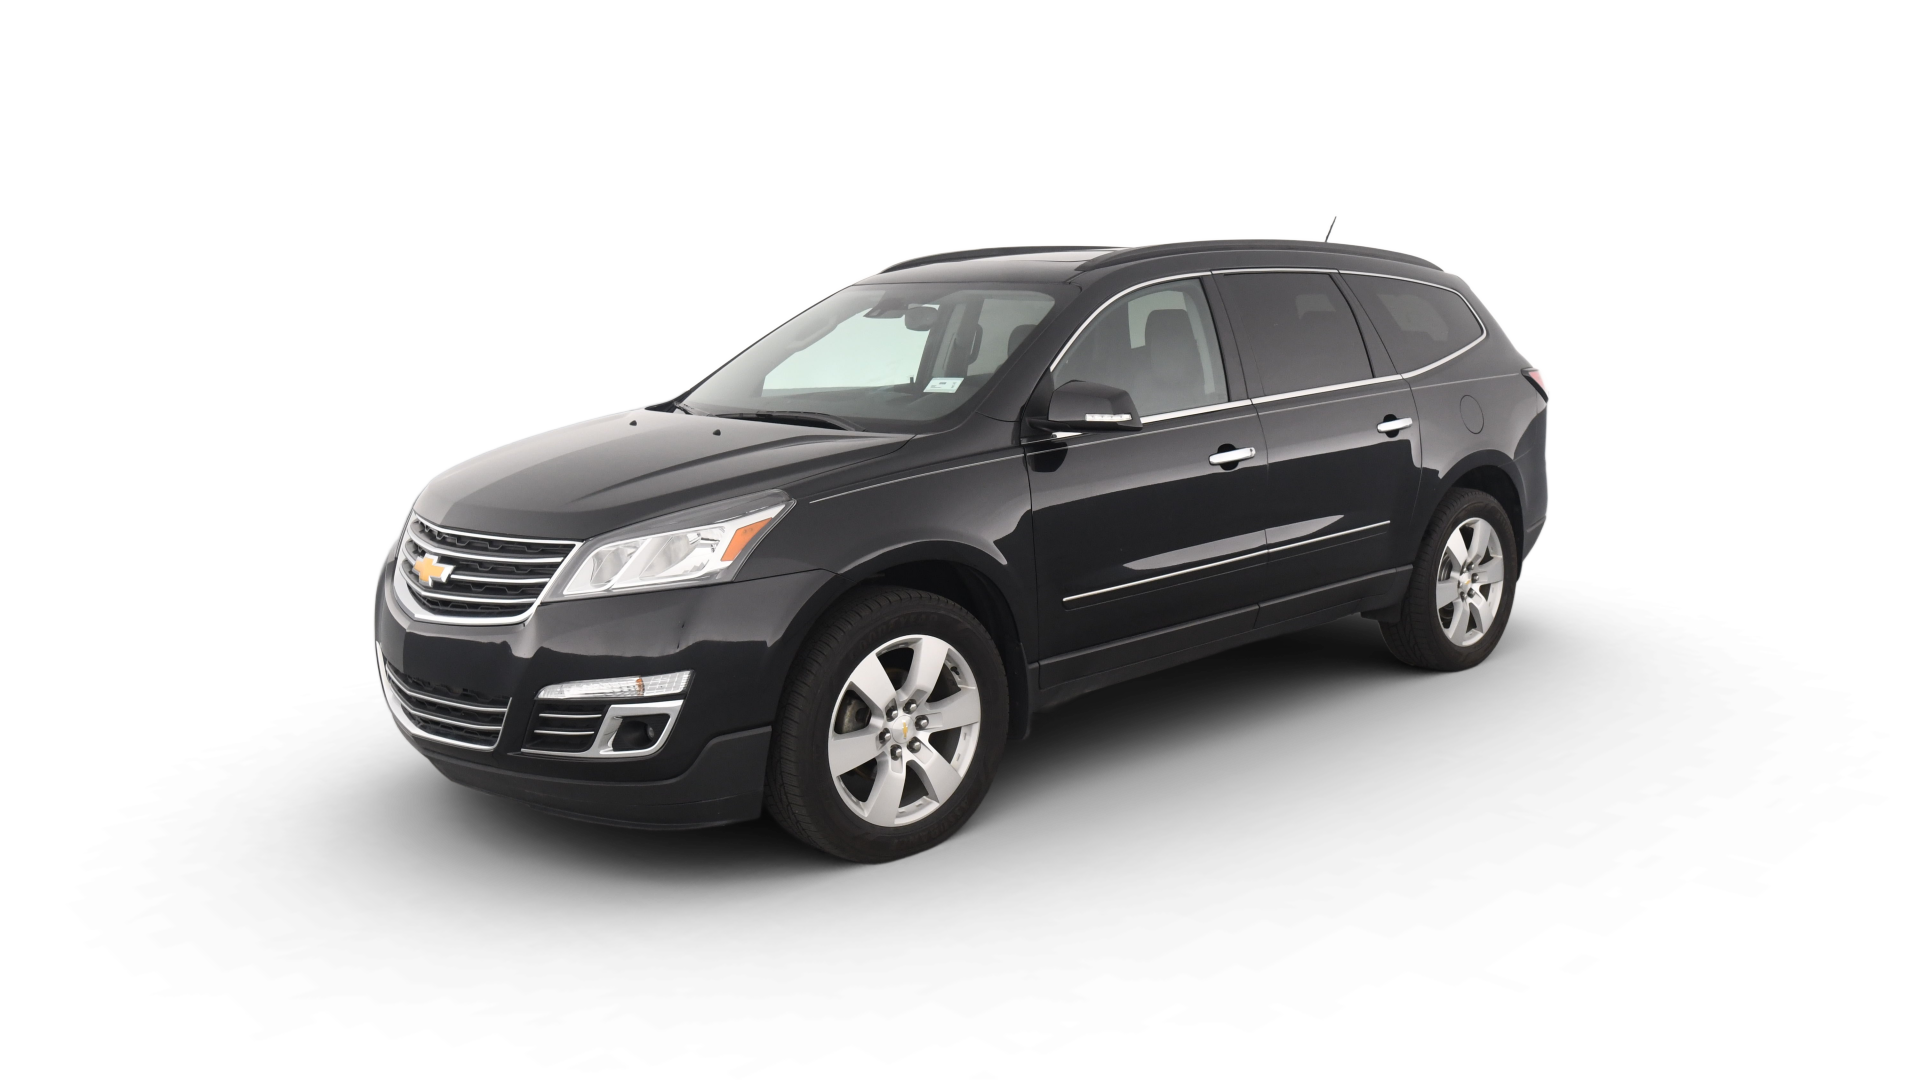 Used 2015 Chevrolet Traverse For Sale Online | Carvana